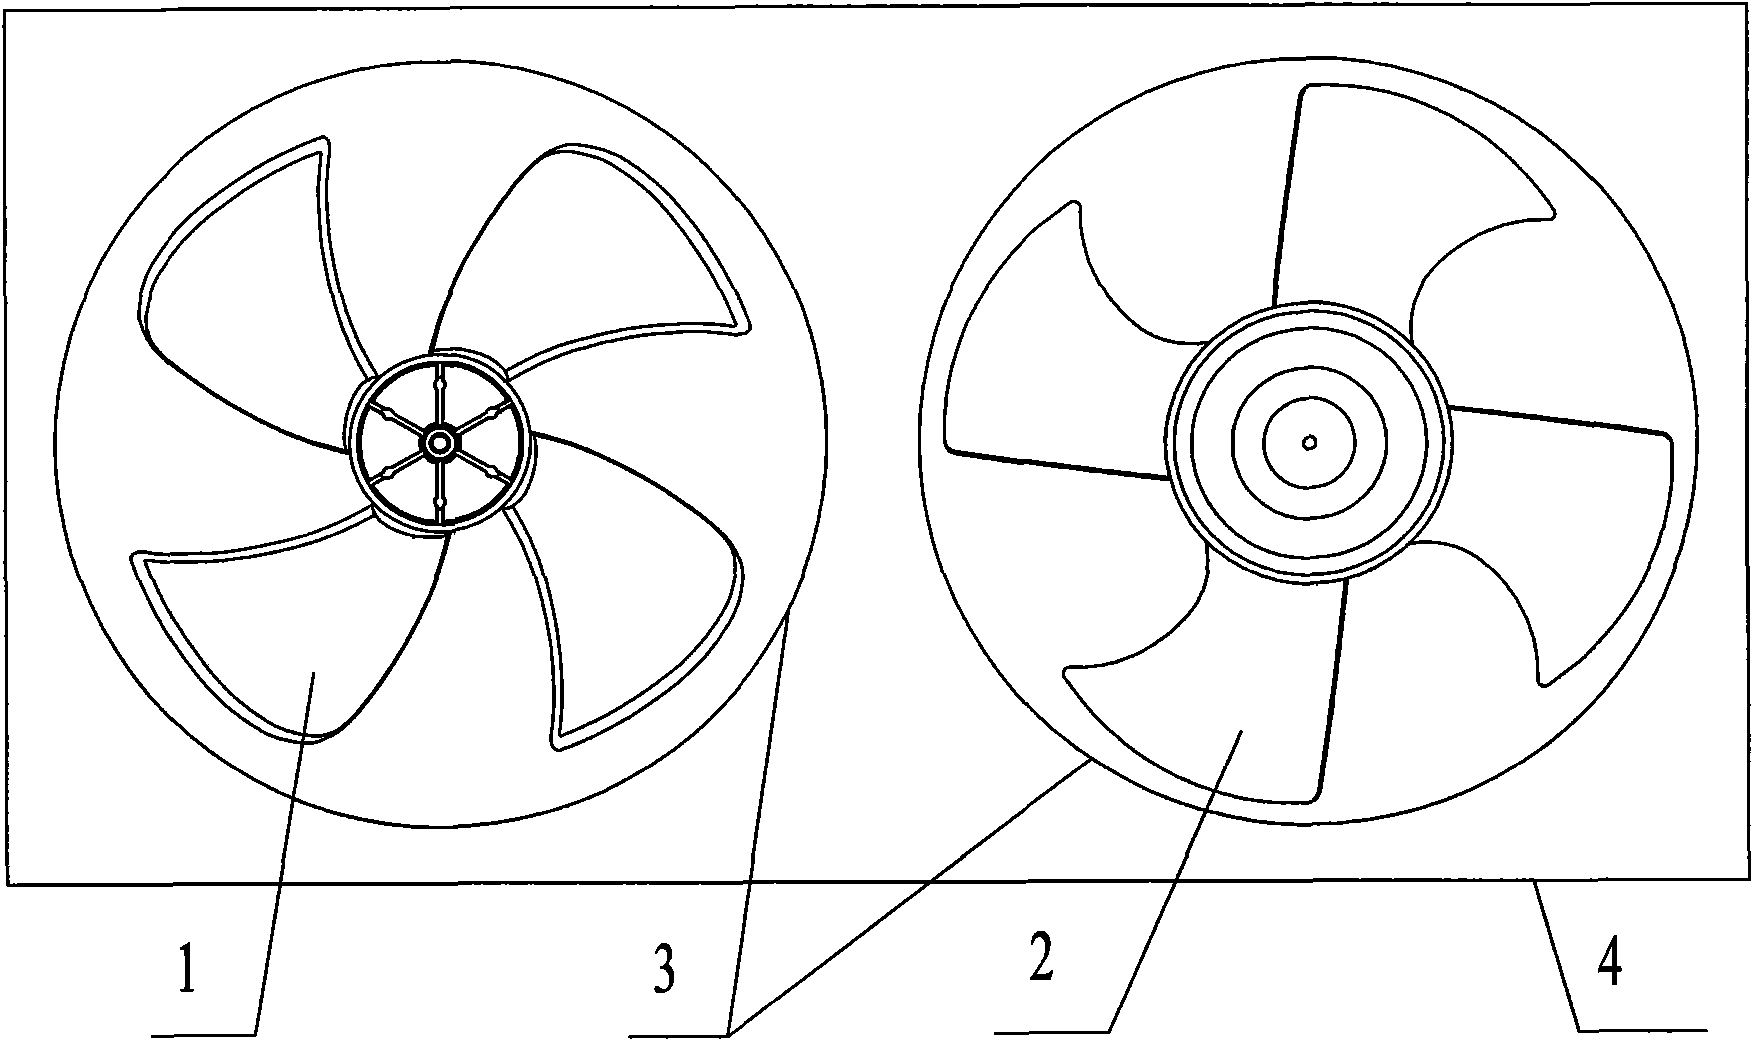 Double axial-flow wind wheel system